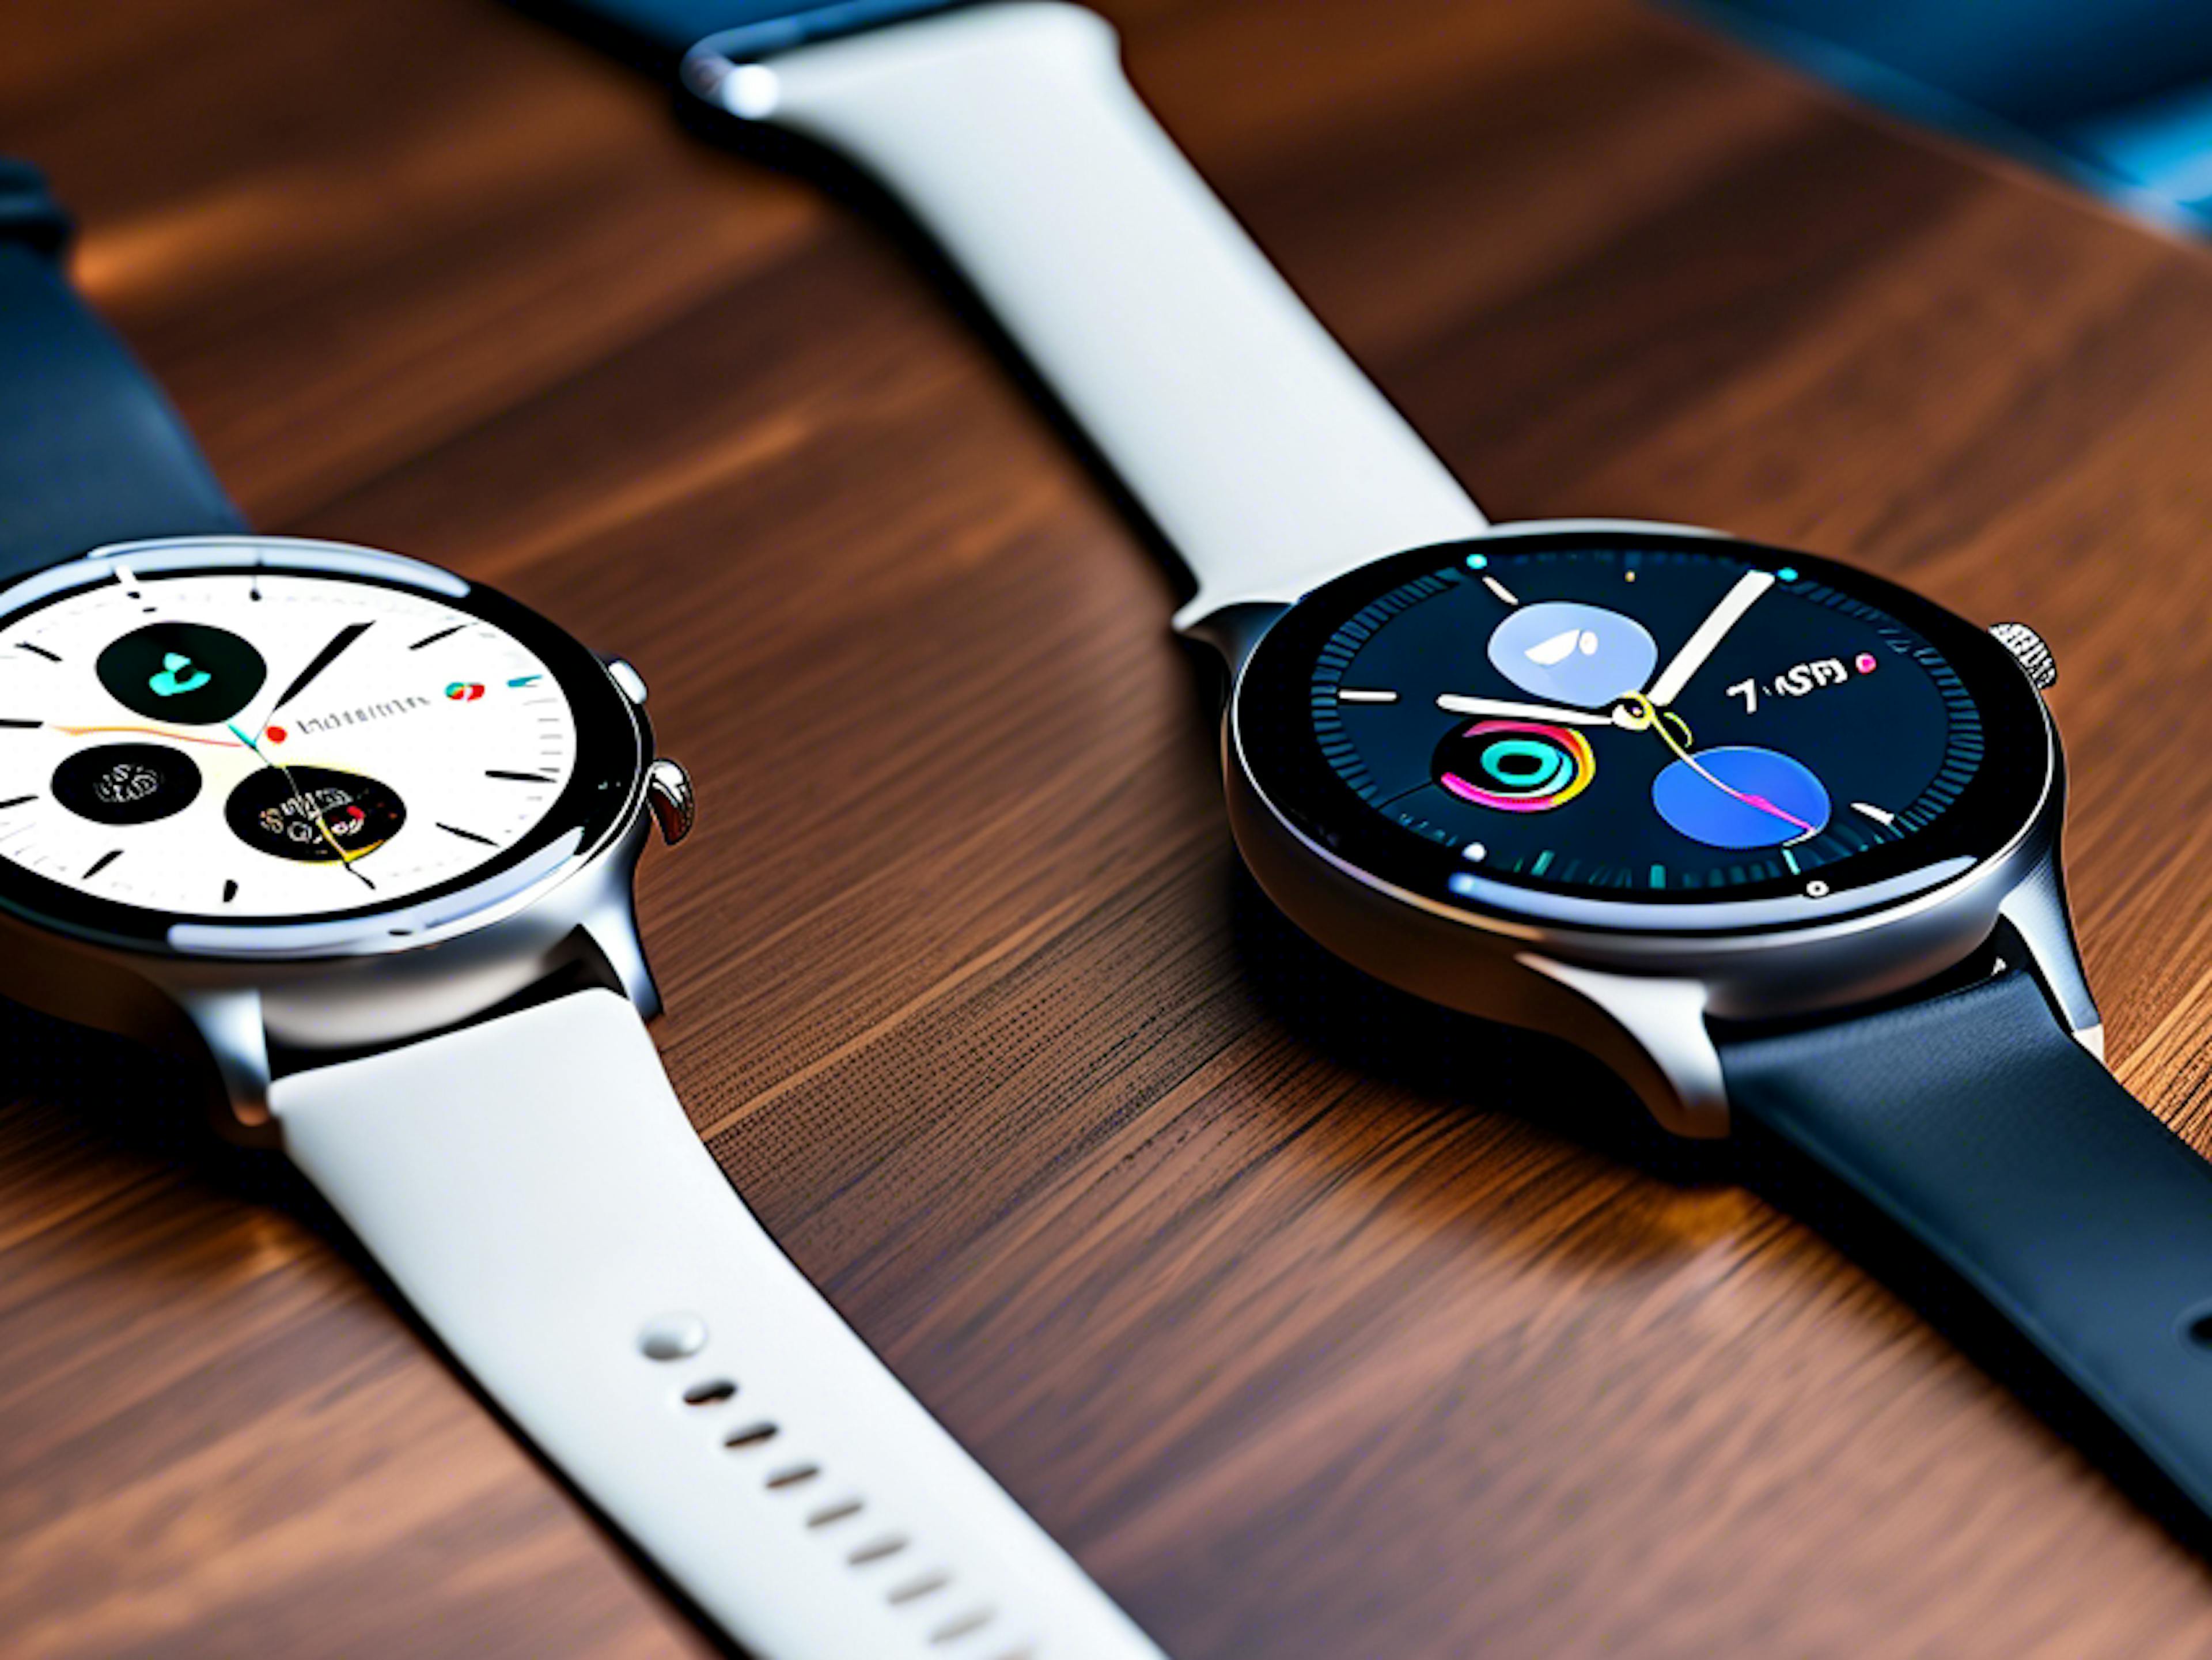 2 smartwatches side by side for comparison.